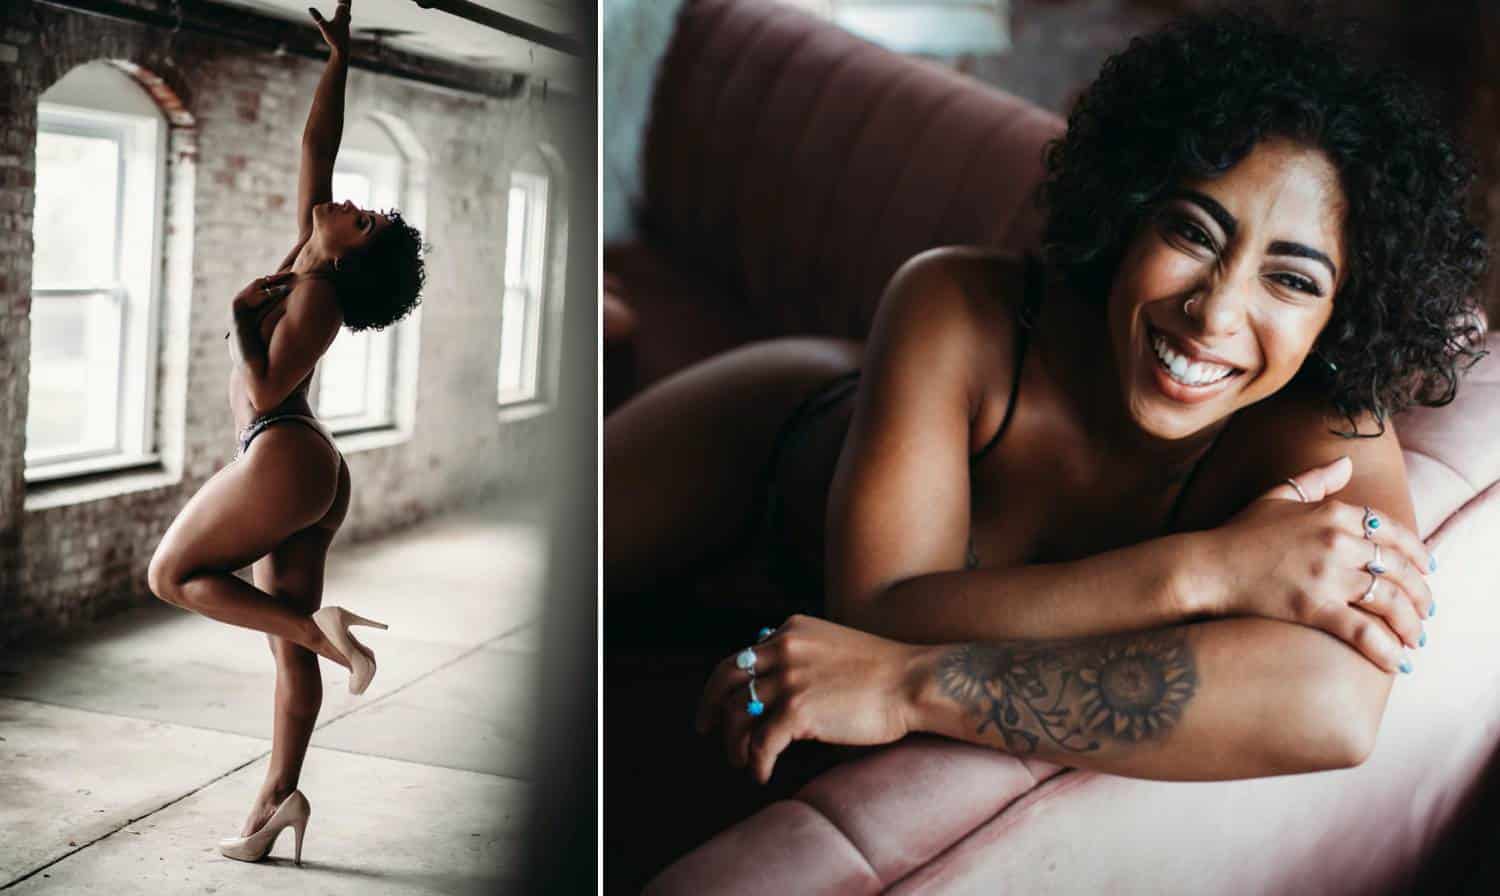 In photo one, a boudoir photography model poses in high-heels, doing a dance-like move while facing the large windows of a loft-style boudoir studio. In the next photo, a woman reclines on a sofa and smiles at the camera.